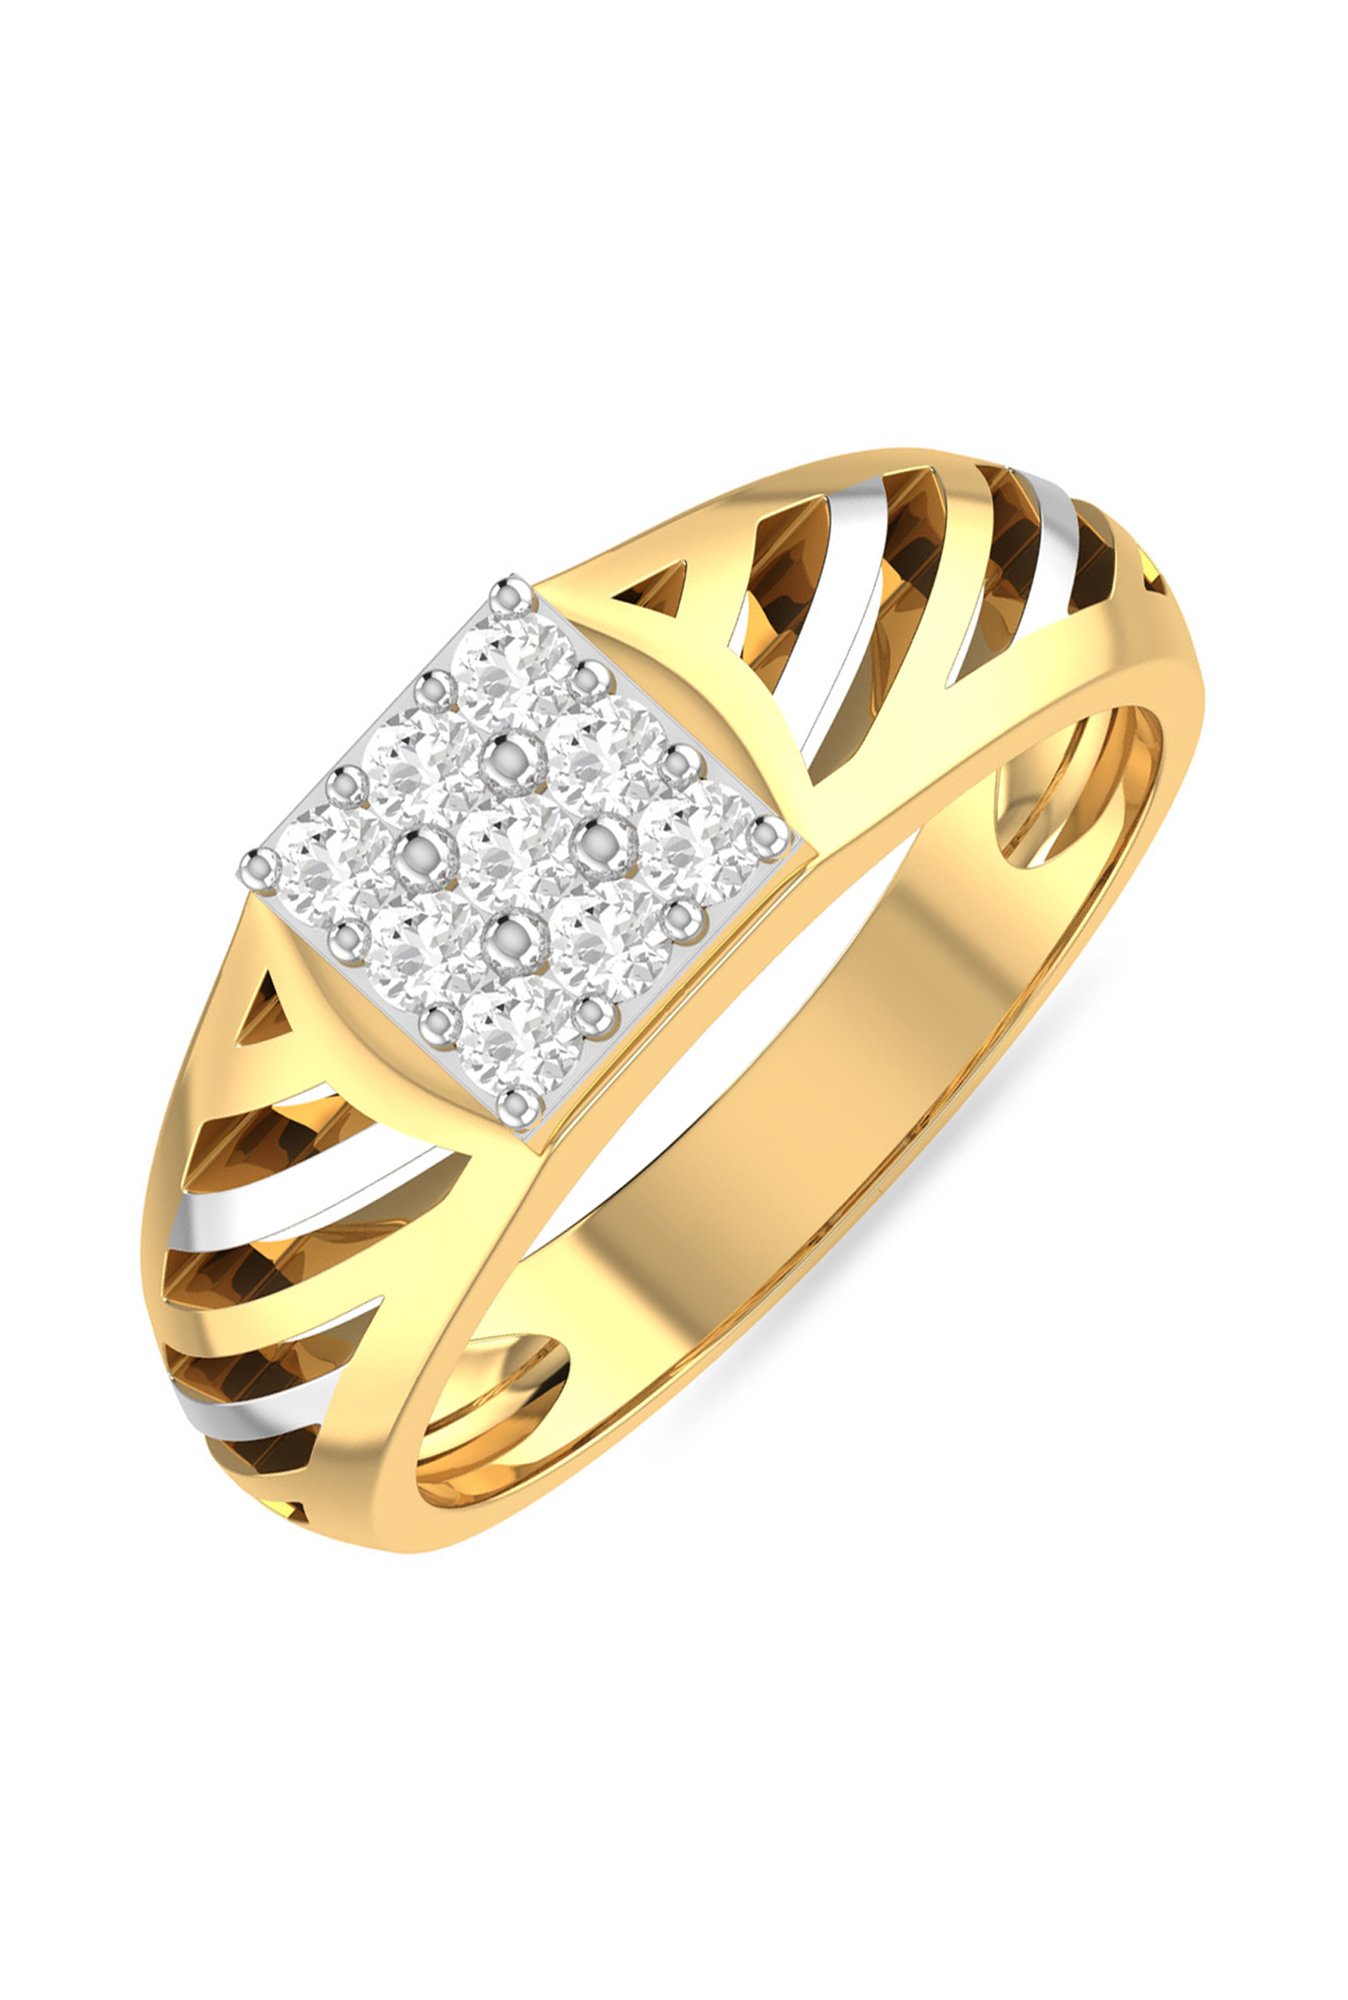 From the World of Fashion: Golden Rings Are Gaining Traction and Here Are 5  Reasons Why - Hedonist / Shedonist